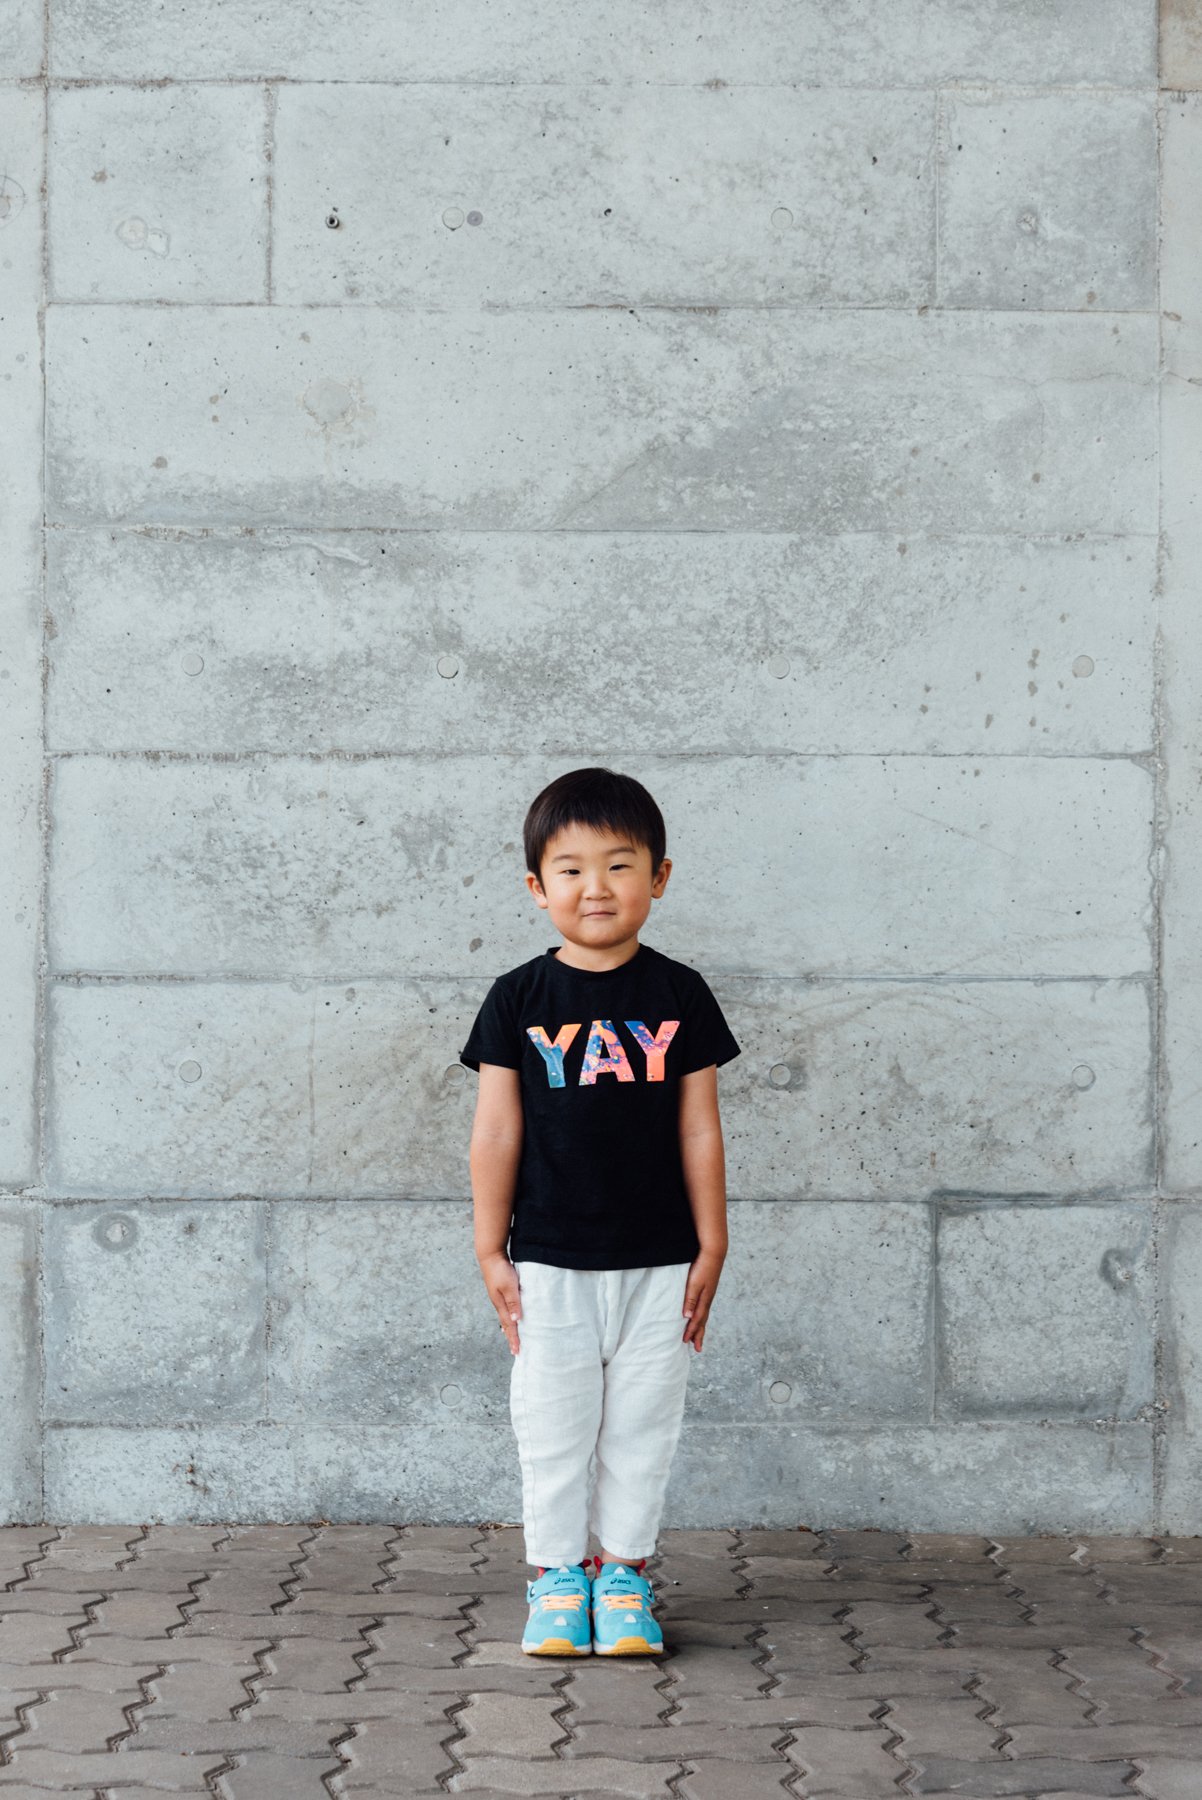  T-shirt:  100% COTTON   Pants:  100% LINEN   “They are favorites that he wore a lot last summer. He couldn't wear them any longer in no time. They are still beautiful and I plan to transfer them to my friend's child." (Mother)    Tシャツ： 綿　100%  パンツ： 